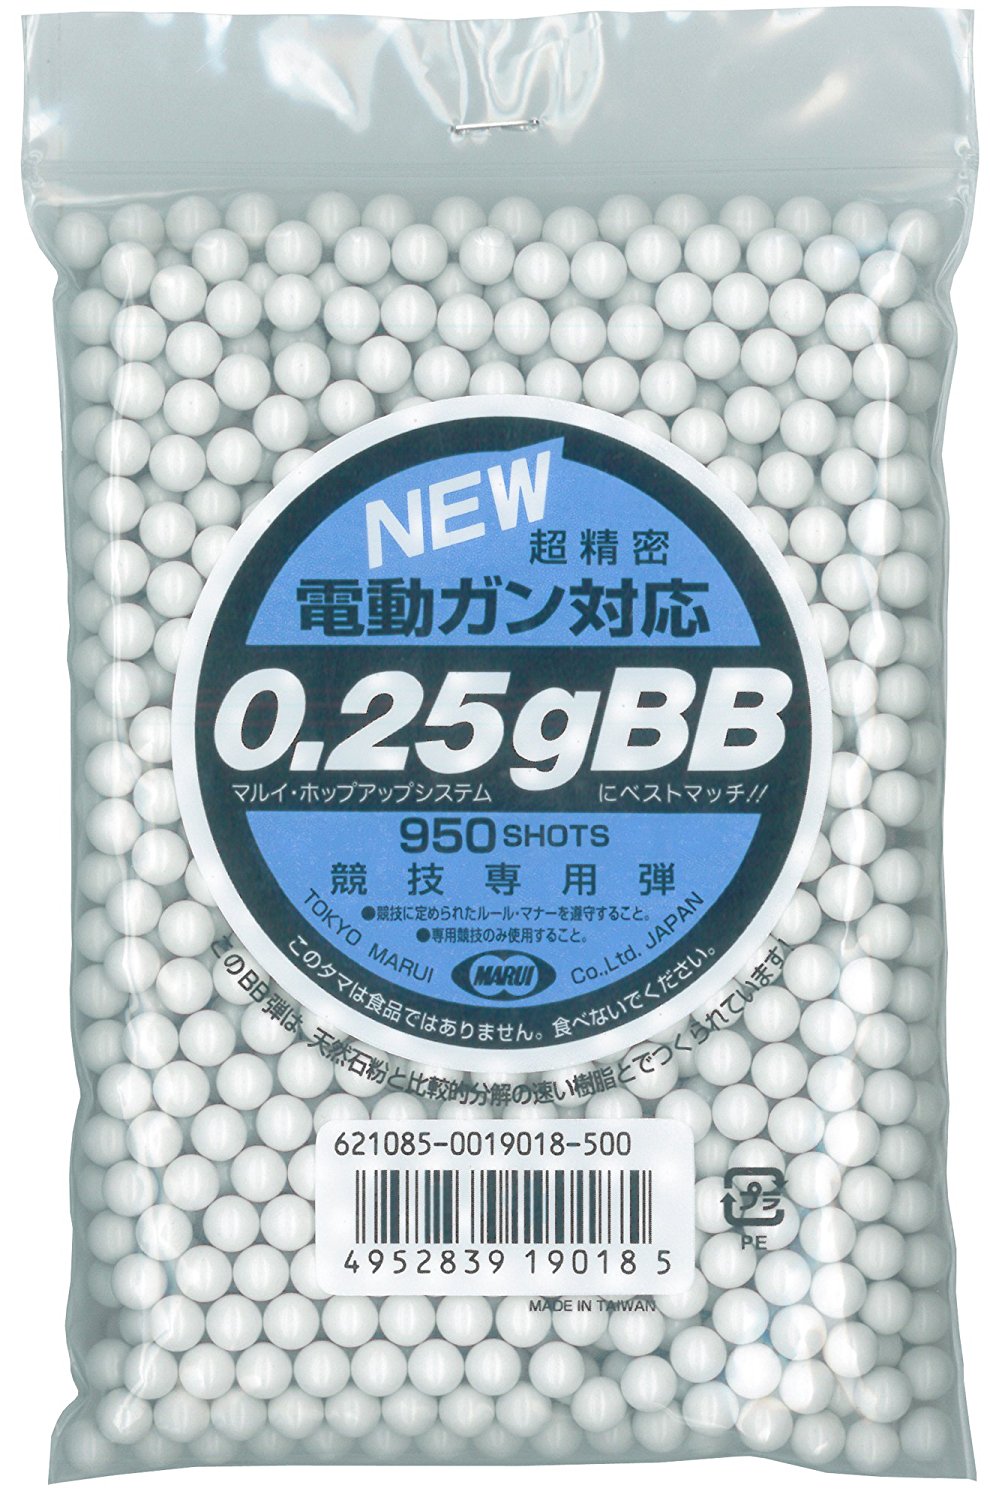 BB Bullet 0.25g for Competition Use (950 BBs)